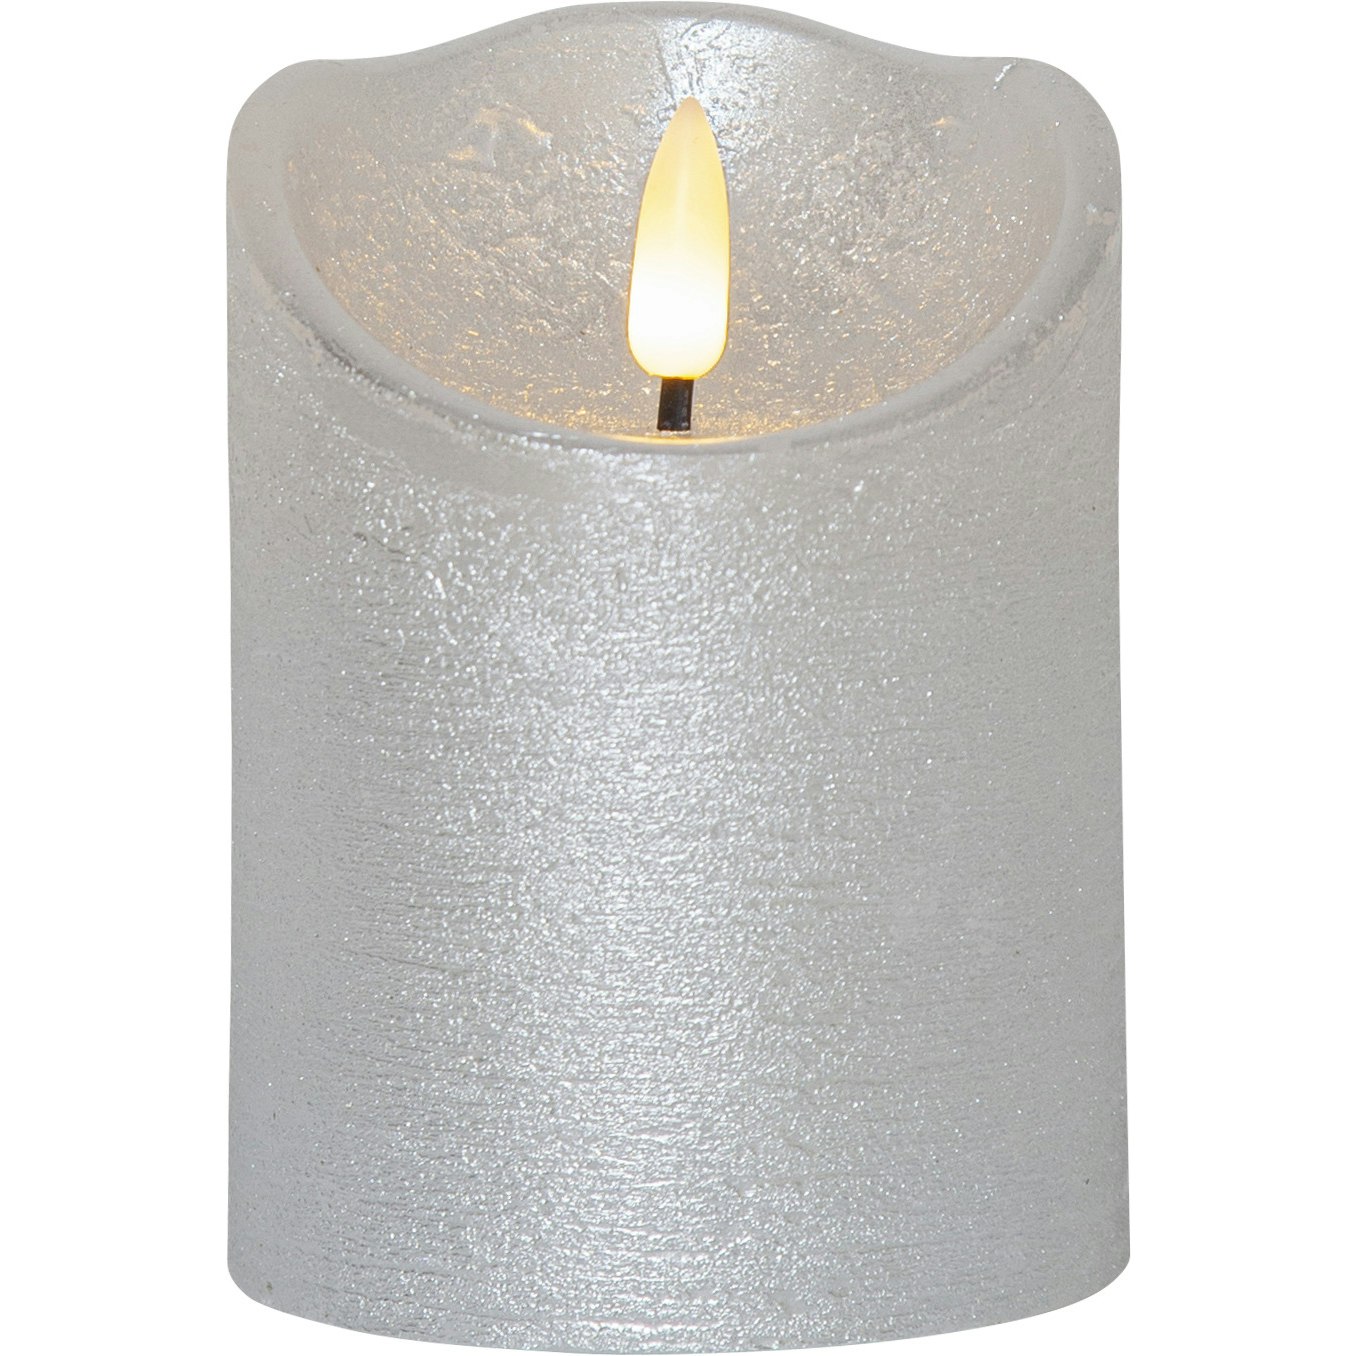 Flamme Rustic LED Pillar Candle Silver, 10 cm